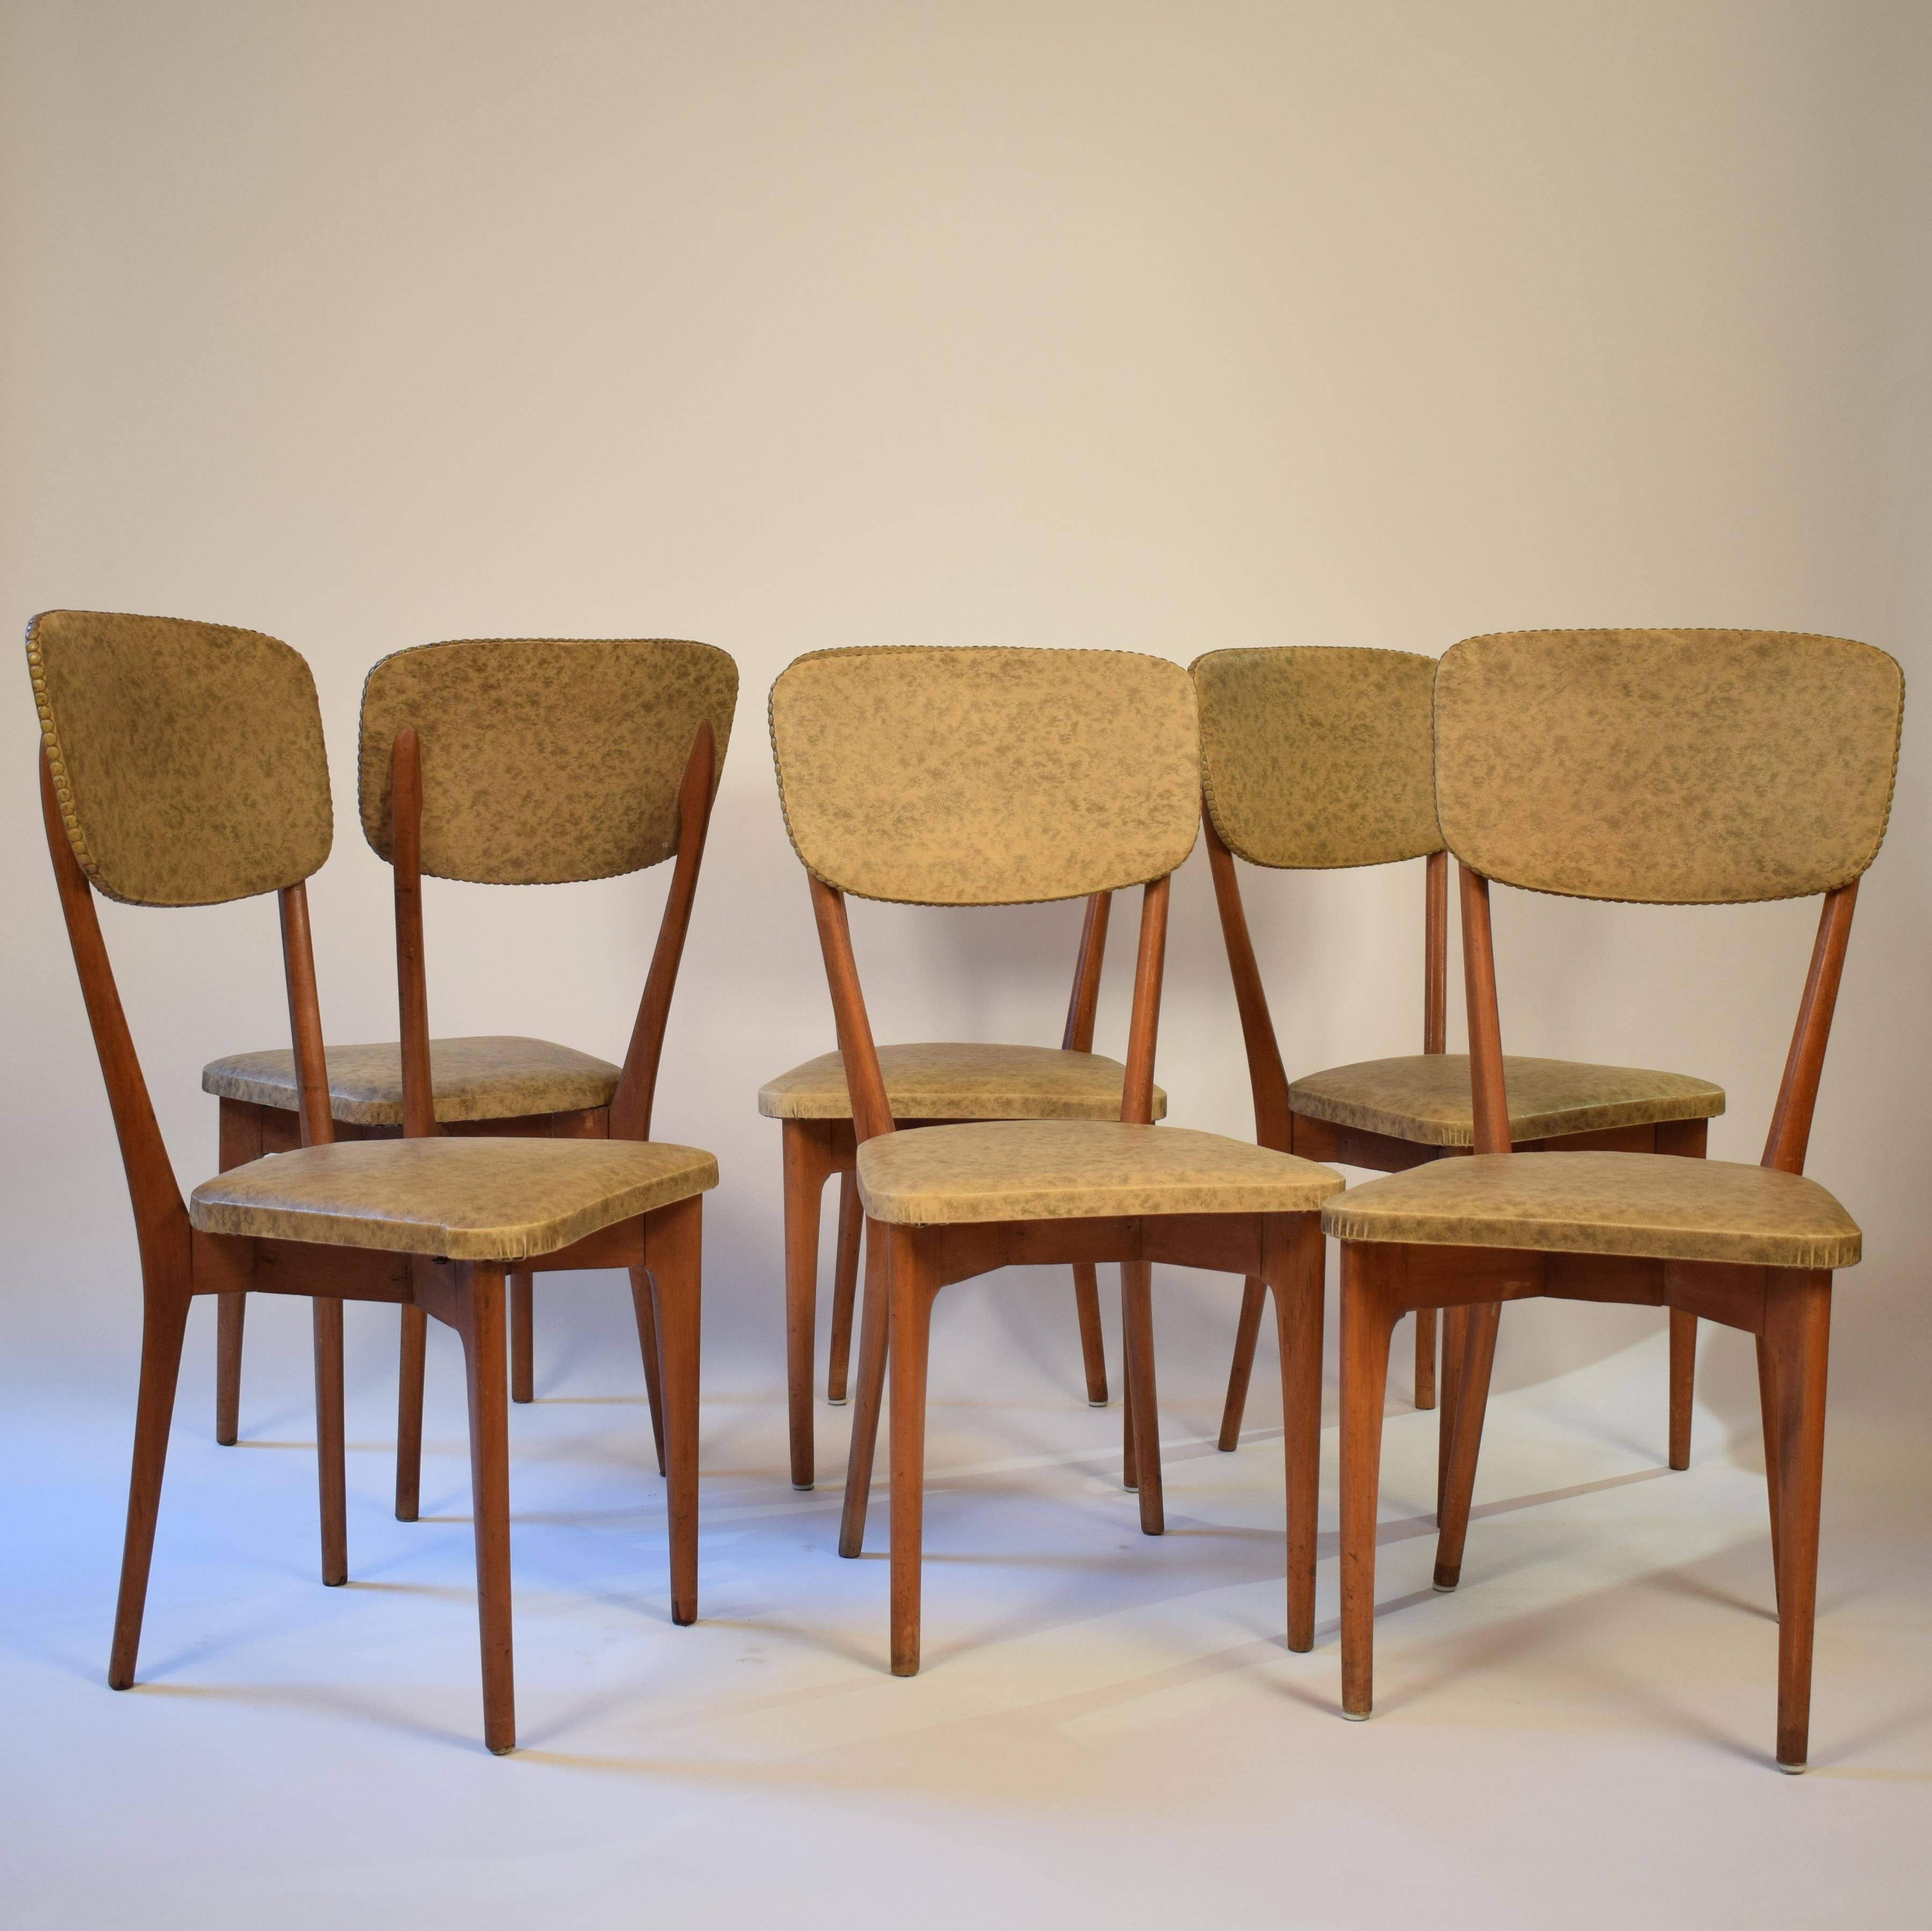 This set of 6 chairs where designed Ico Parisi in the 1950s and produced by Figli de Amadeo de Cassina.
The chairs have the original upholstery and surface.
They are in a very good condition.